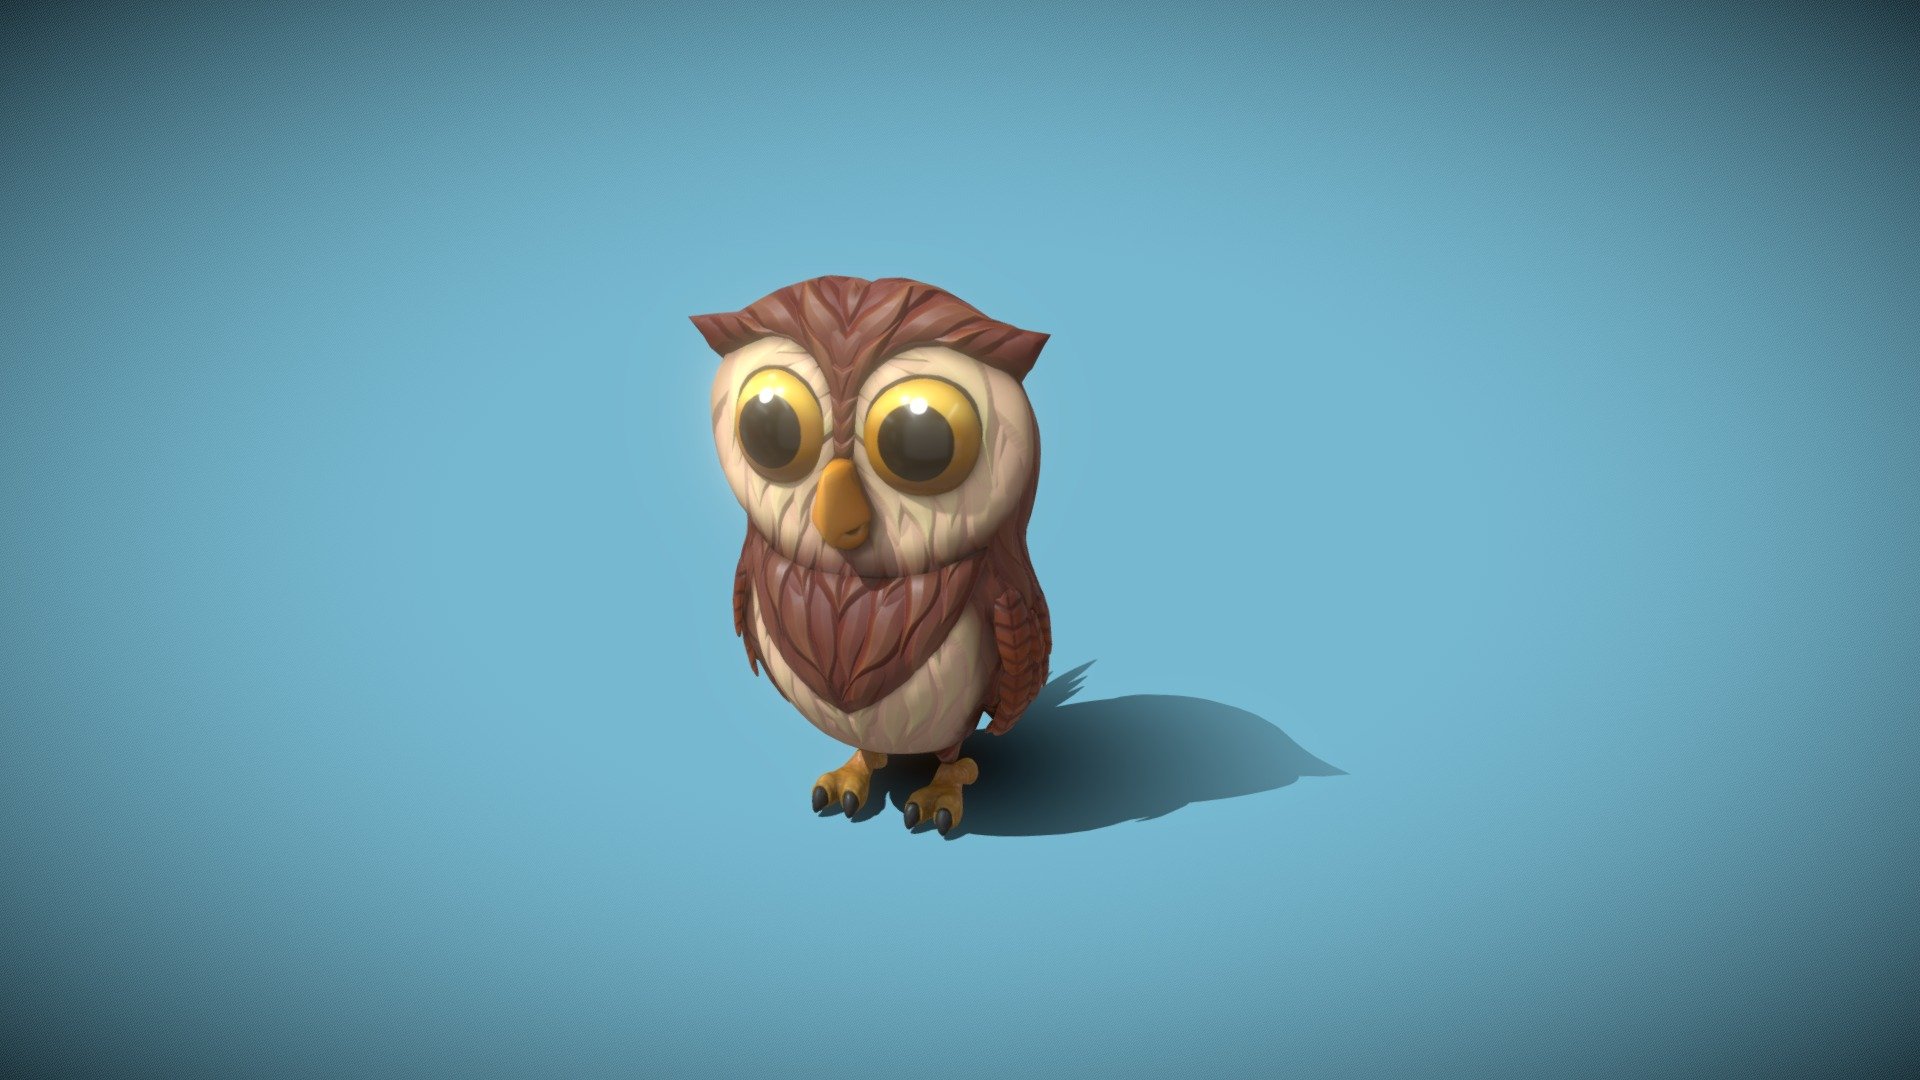 Cartoon Owl Rigged and Animated 3D Model is completely ready to be used in your games, animations, films, designs etc.  

All textures and materials are included and mapped in every format. The model is completely ready for visualization in any 3d software and engine.  

Technical details:  




File formats included in the package are: FBX, OBJ, GLB, DAE, PLY, STL, BLEND, gLTF (generated), USDZ (generated)

Native software file format: BLEND

Render engine: Eevee

Polygons: 10,551

Overall vertex count: 10,679

Textures: Color, Metallic, Roughness, Normal, AO

All textures are 2k resolution

The model is rigged and animated (amination: idle)

We have another model with more animations

Only following formats contain rig and animation: BLEND, FBX, GLTF/GLB
 - Cartoon Owl Rigged and Animated 3D Model - Buy Royalty Free 3D model by 3DDisco 3d model